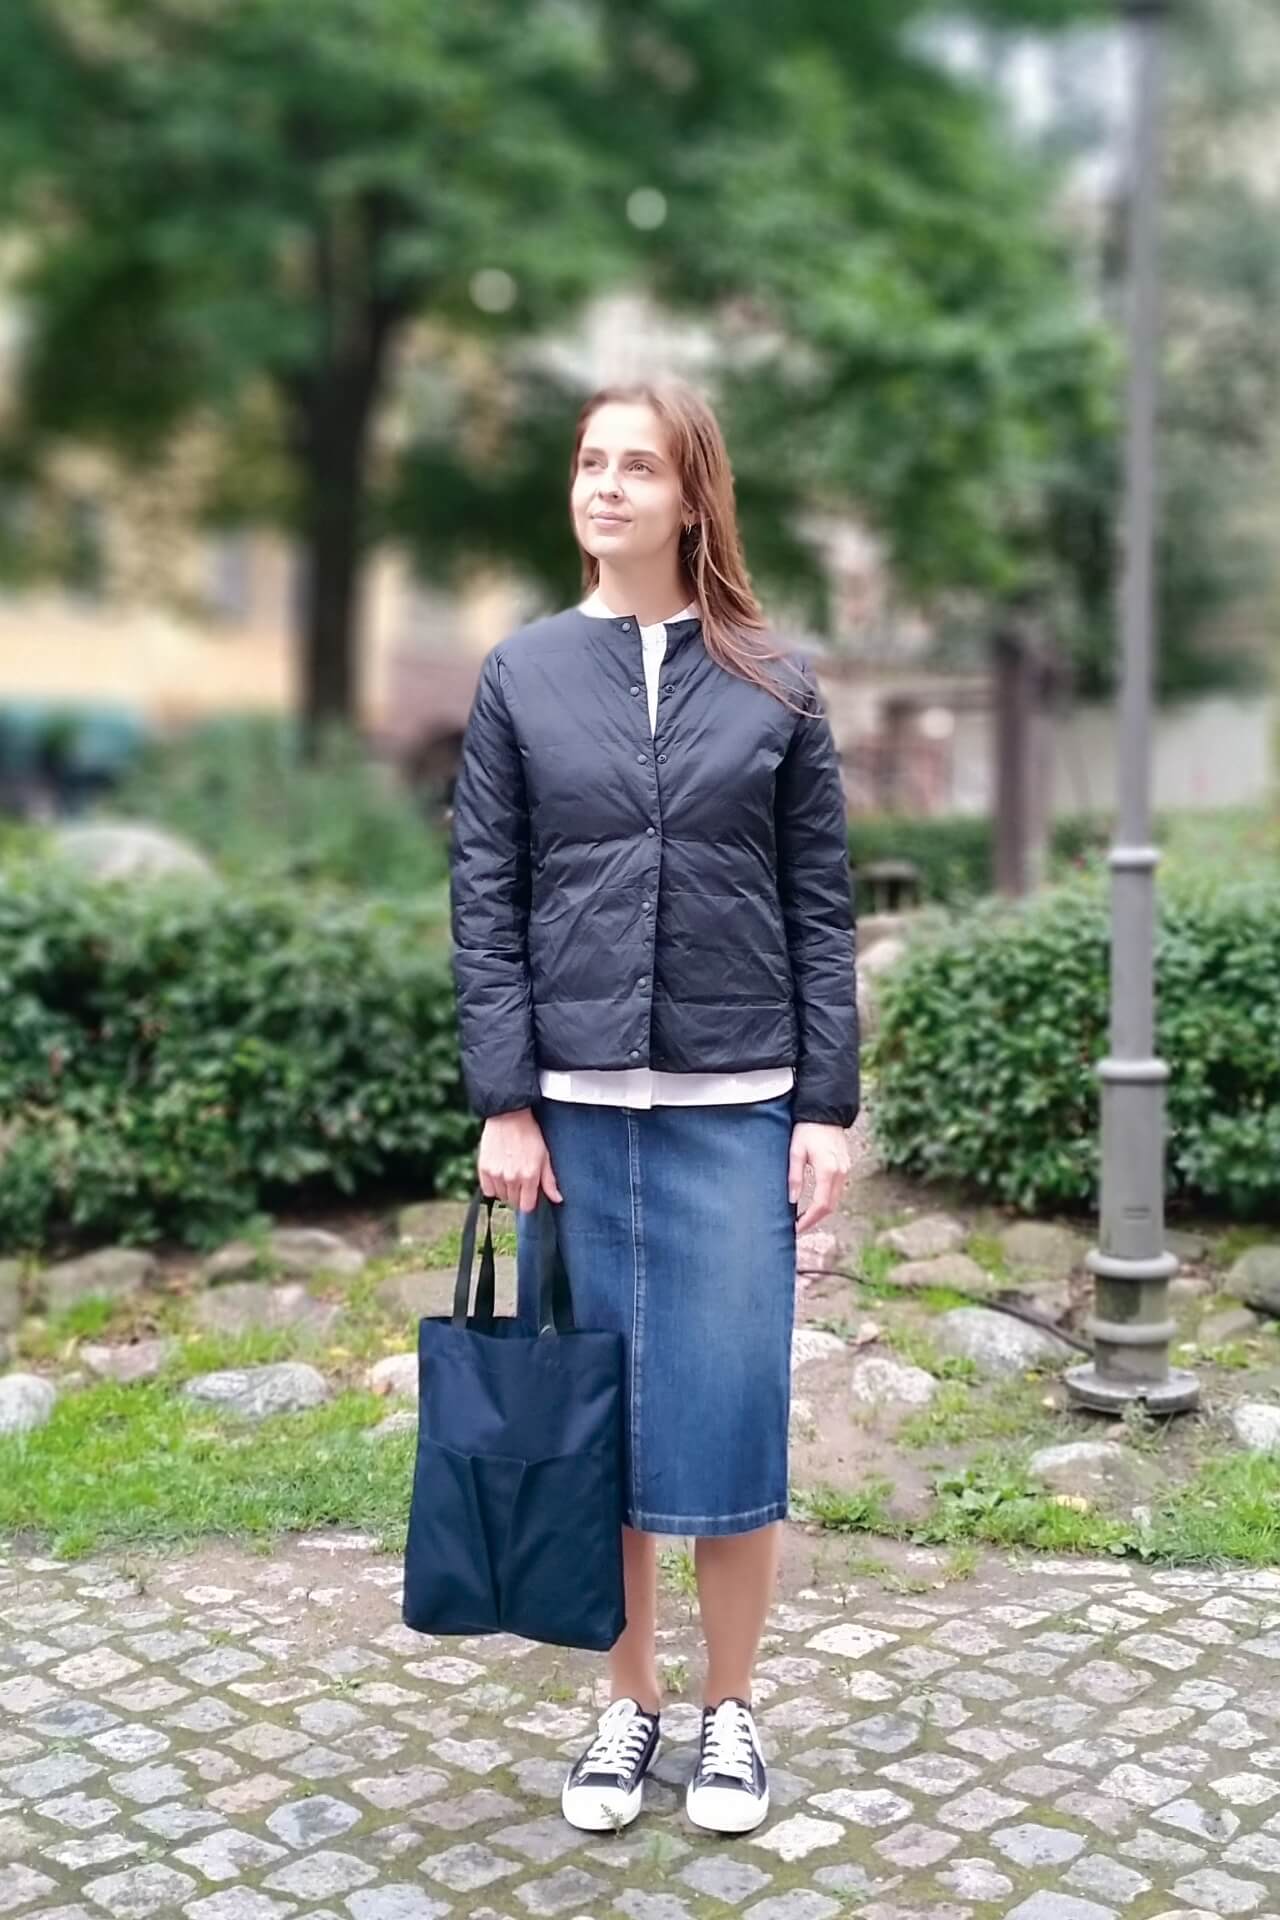 kolbøtte sirene At understrege Lightweight down, indoors and outdoors. | MUJI 無印良品